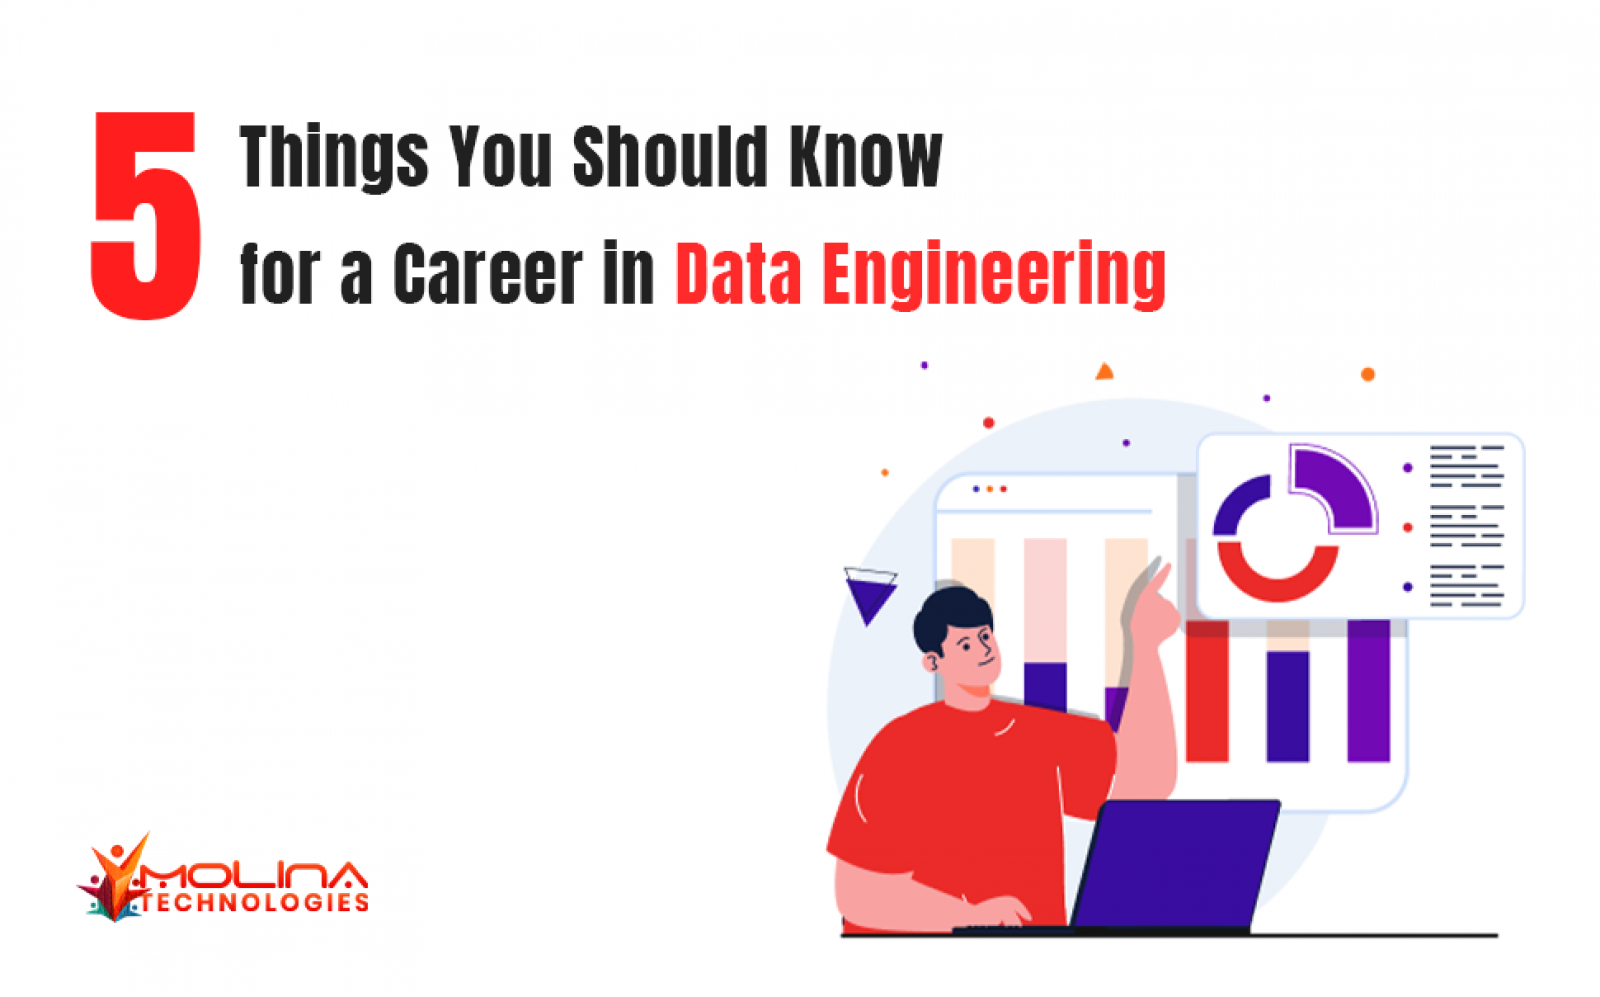 5 Things You Should Know for a Career in Data Engineering